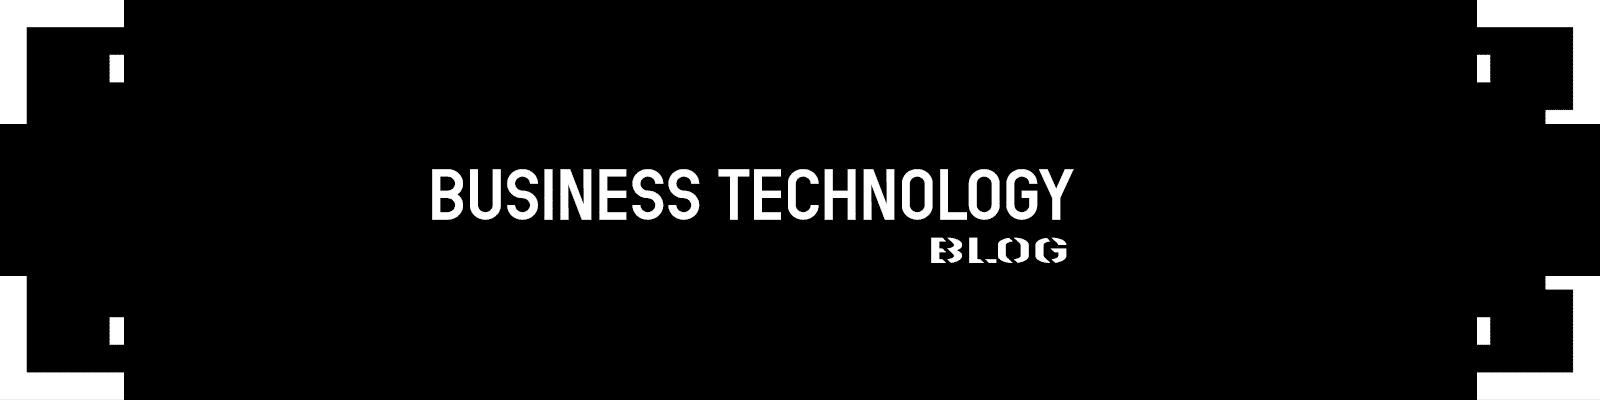 header graphic for technology stories